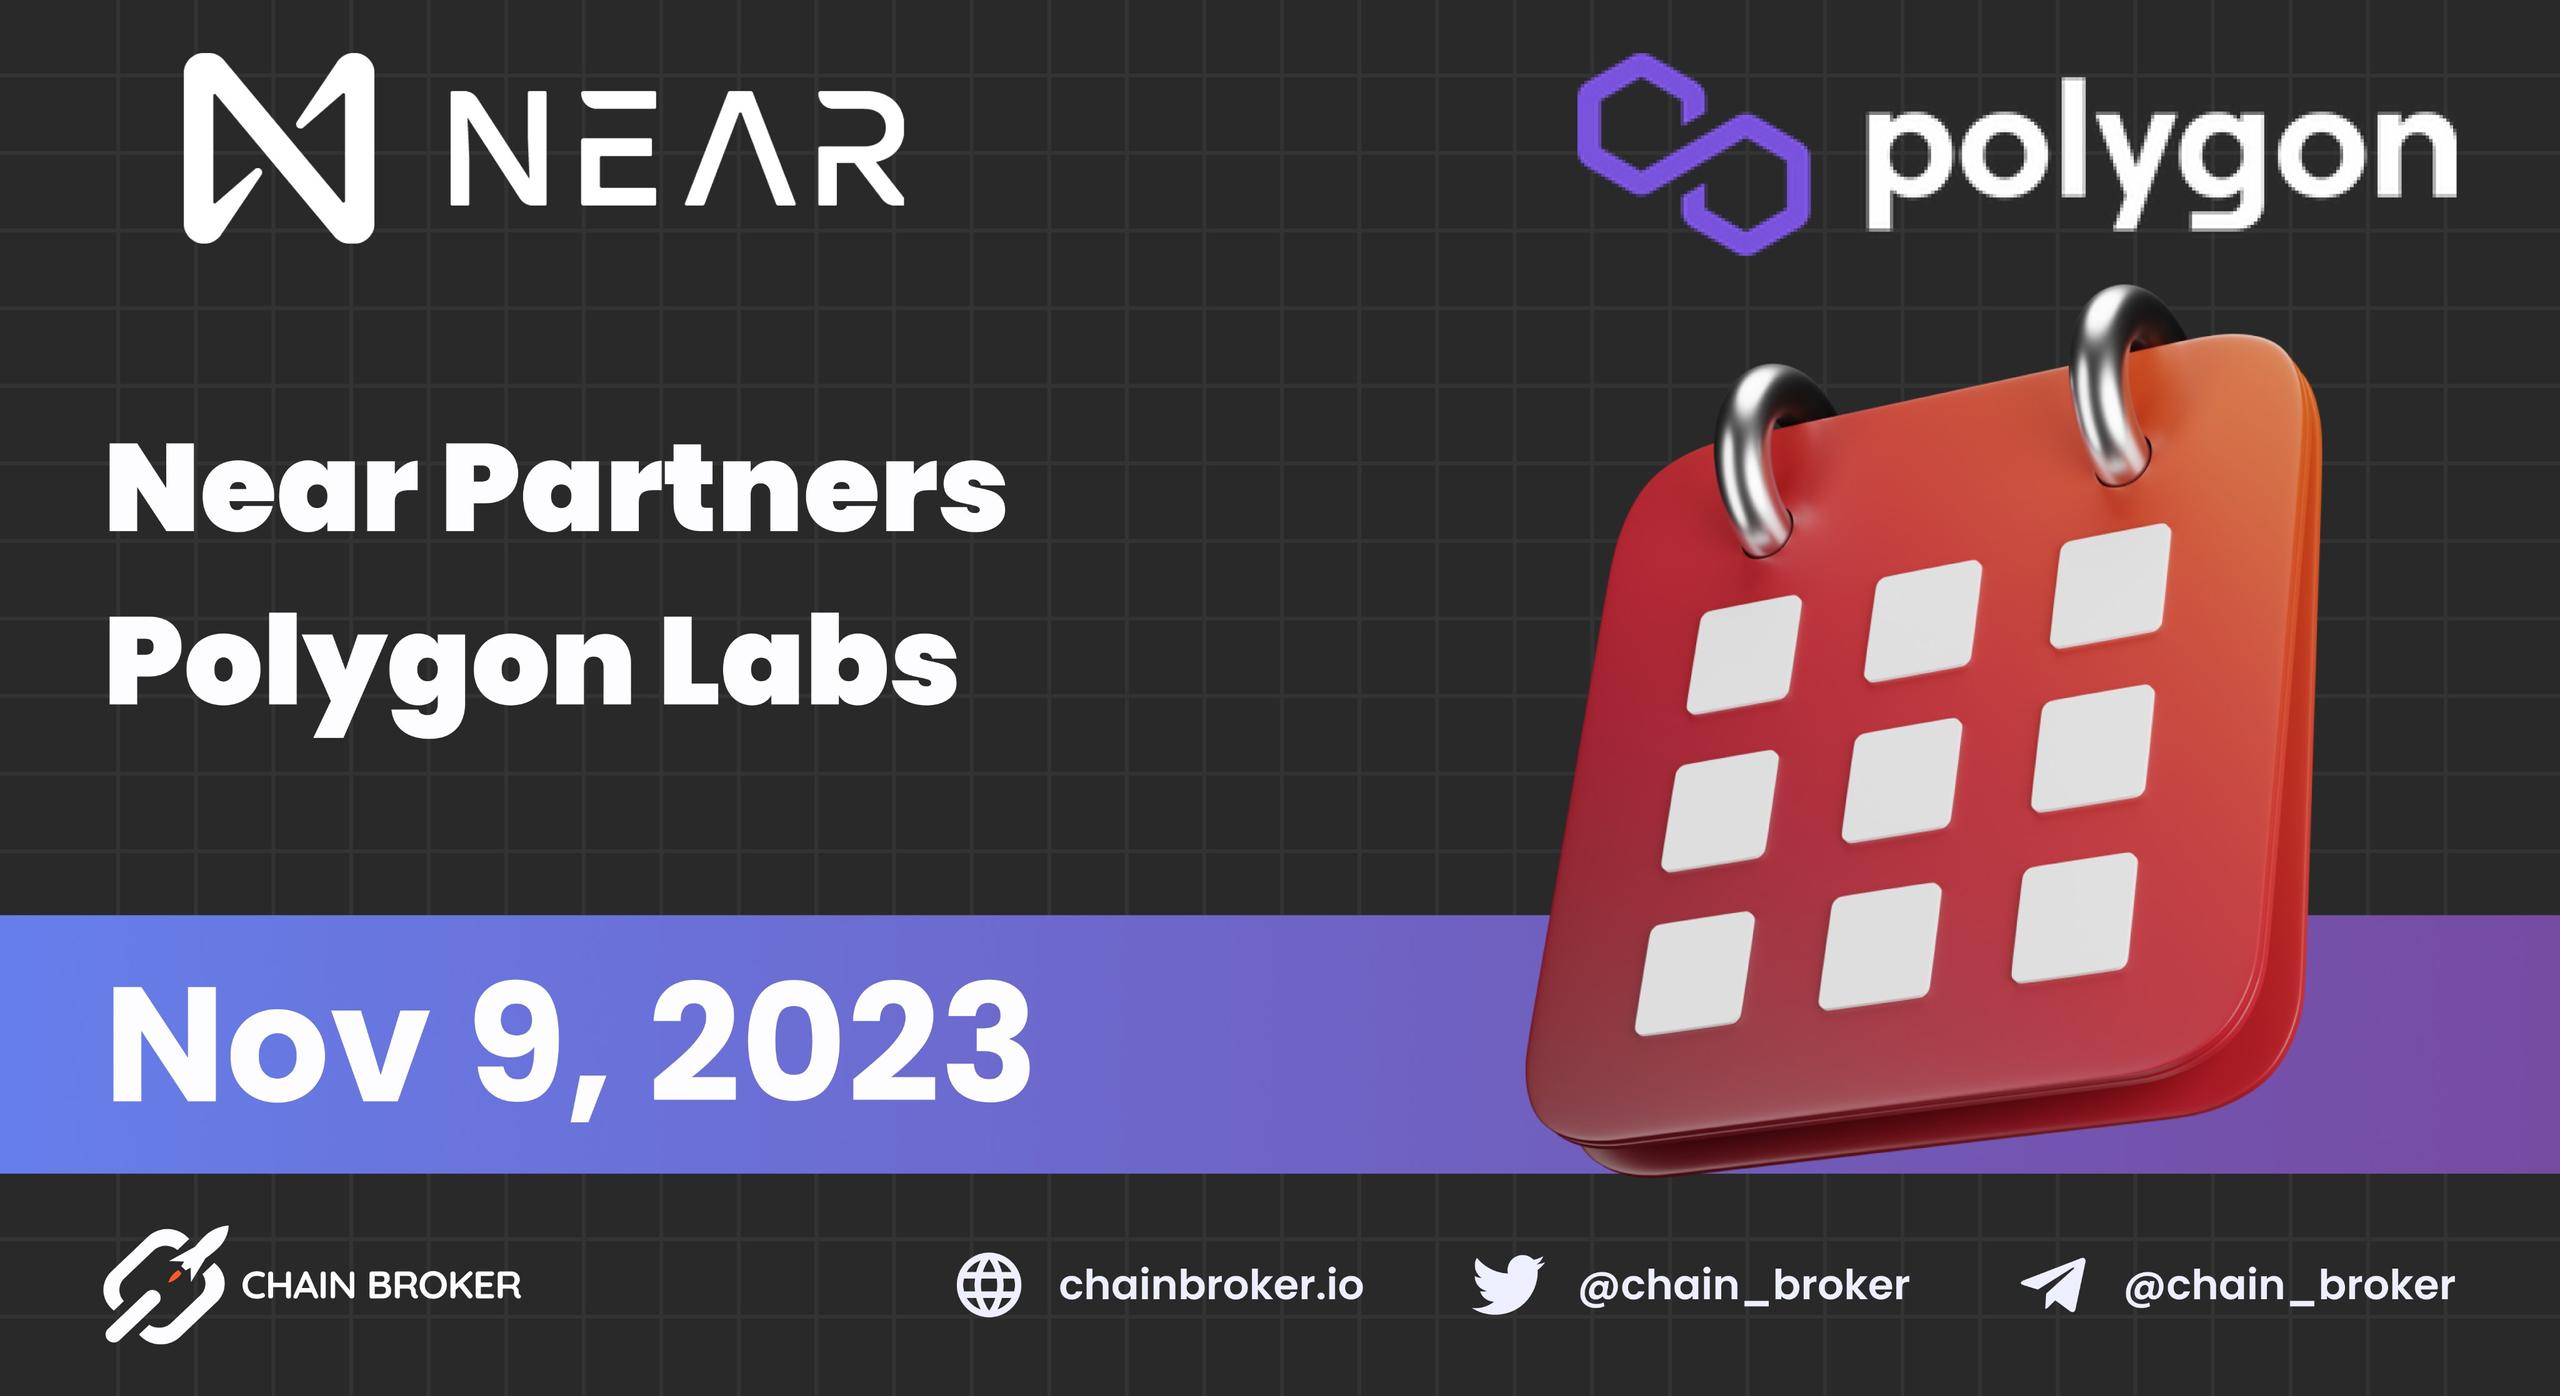 Near announces partnership with Polygon Labs